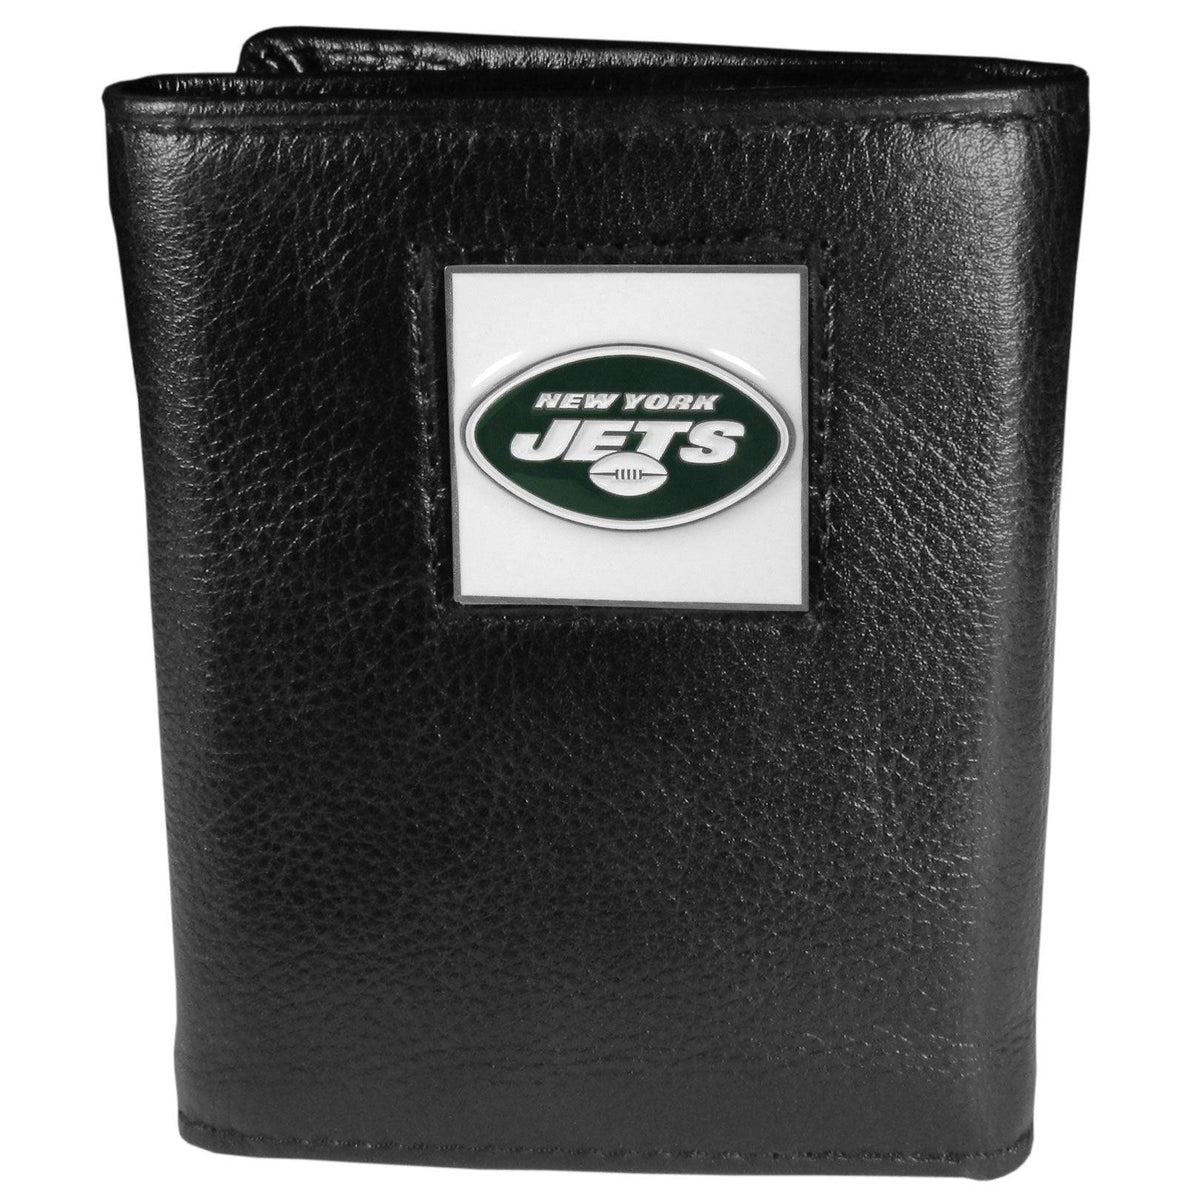 New York Jets Deluxe Leather Tri-fold Wallet Packaged in Gift Box - Flyclothing LLC